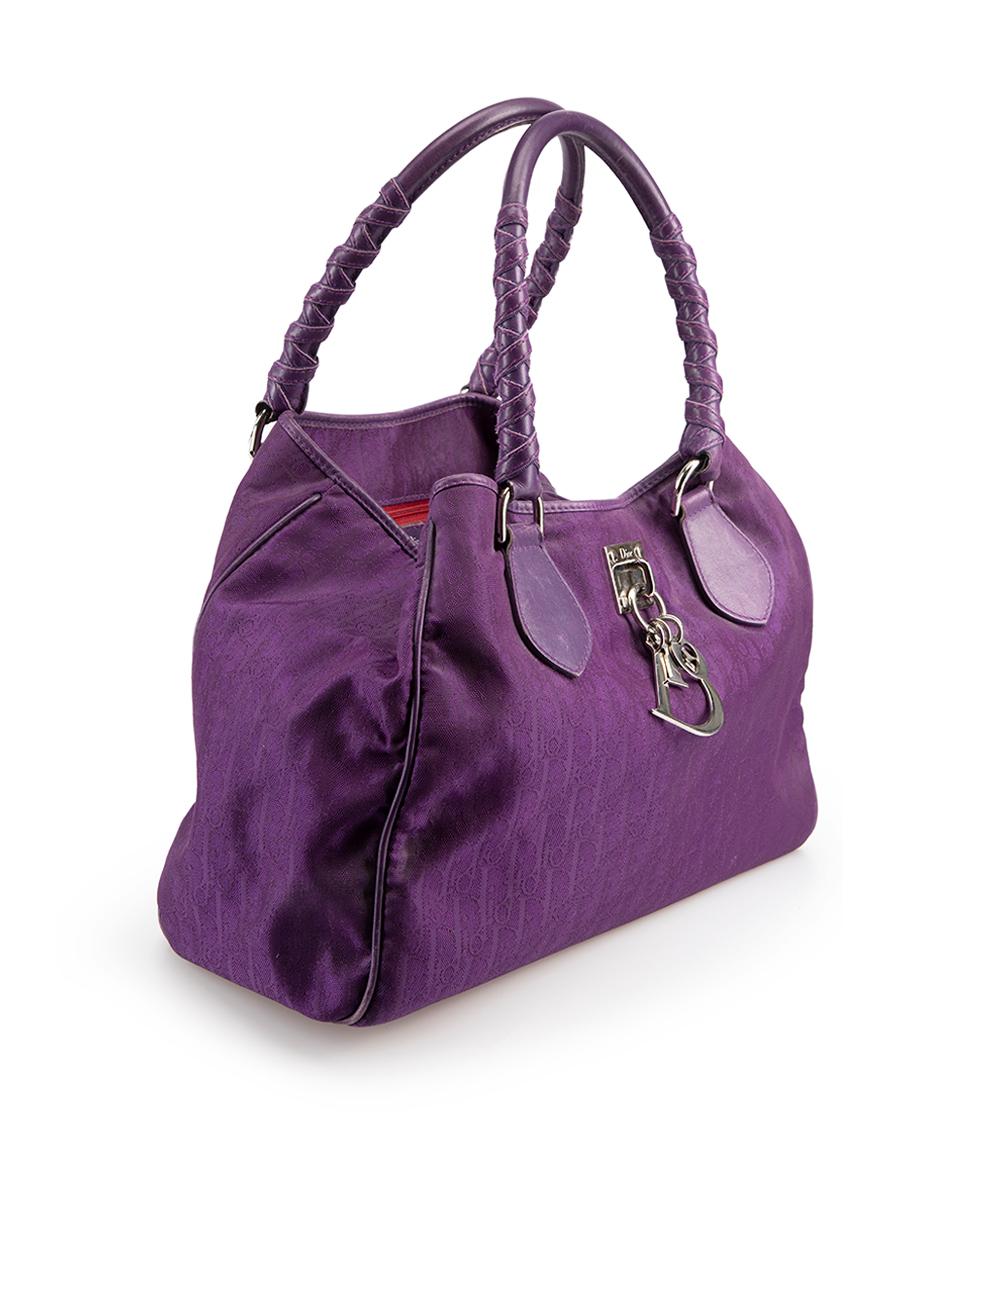 CONDITION is Good. General wear to handbag is evident. Moderate signs of wear to leather along piping on outer corners and along bag straps on this used Christian Dior designer resale item. 



Details


Purple

Nylon

Medium handbag

Oblique